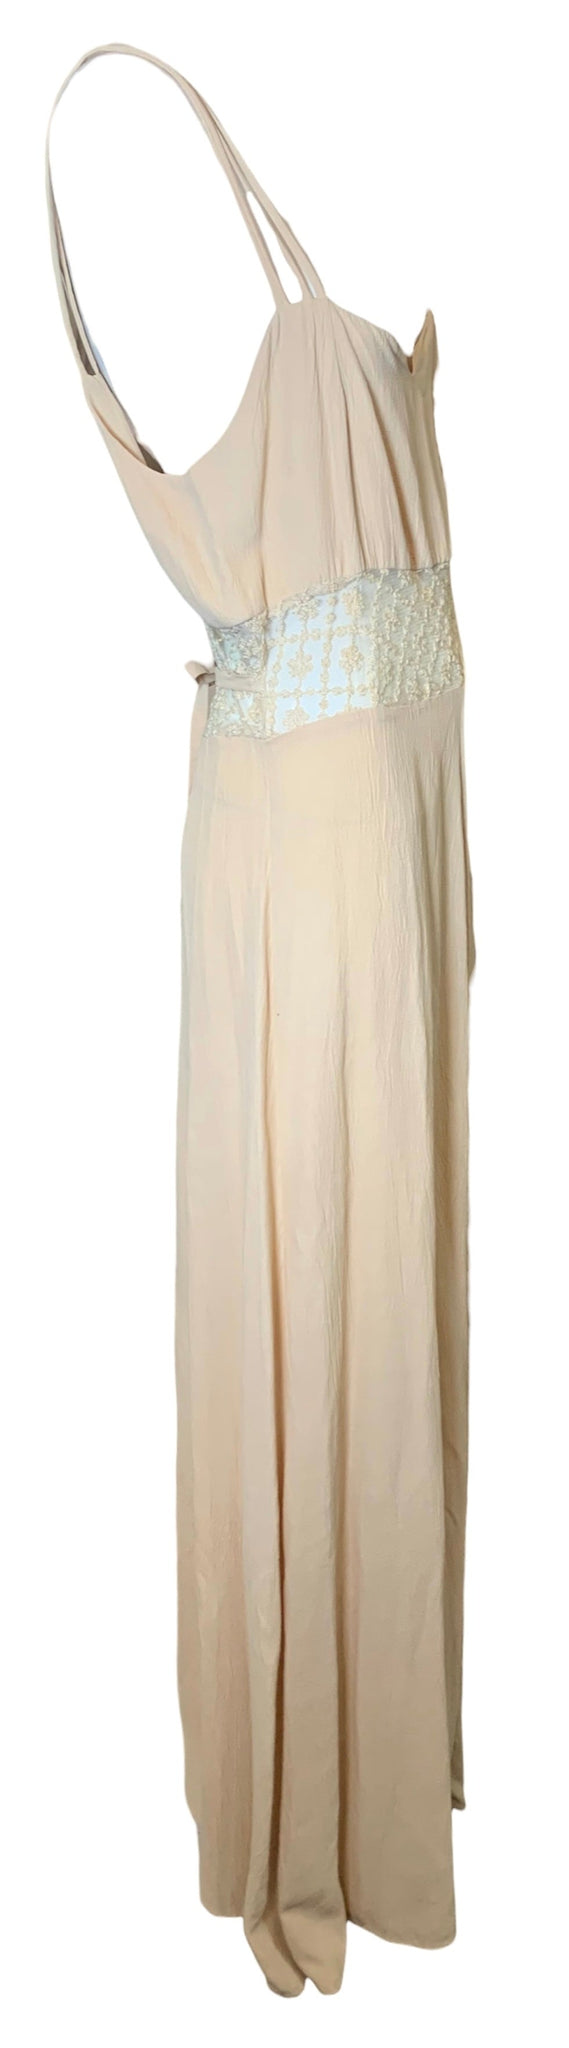 Nude Crinkled Crepe Full Length Slip Dress w Lace Cut Out Detail SIDE 2 of 4